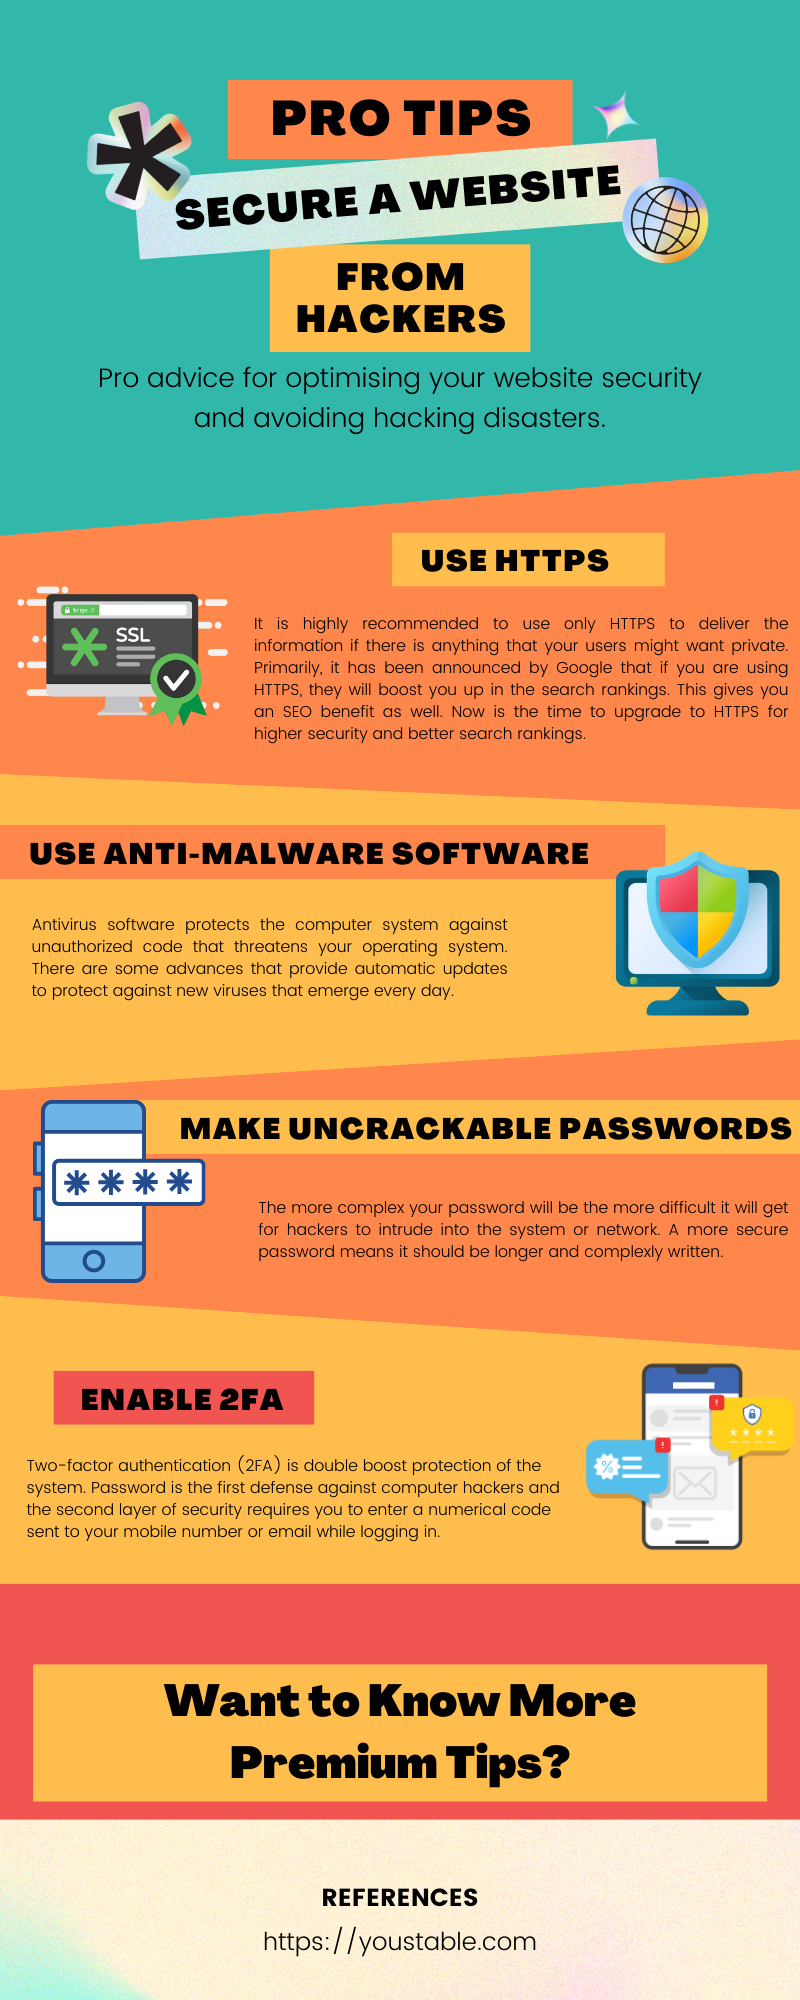 How to secure WordPress website from hackers infographic